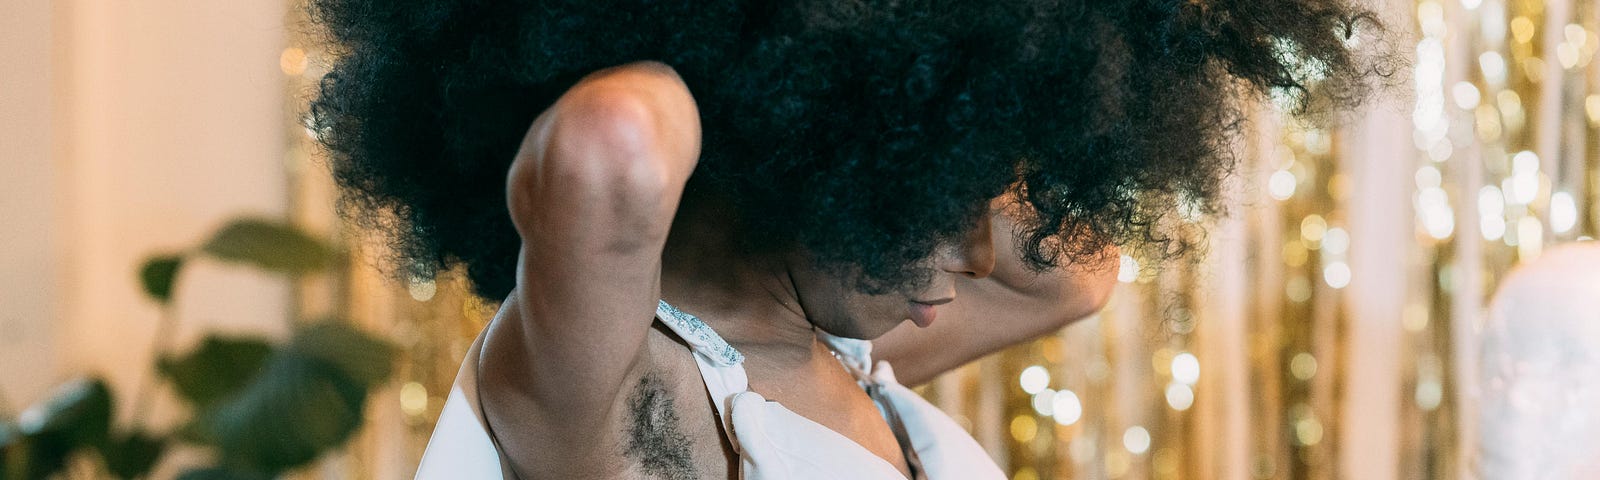 There’s a woman in a white dress. She has an afro and hairy armpits.